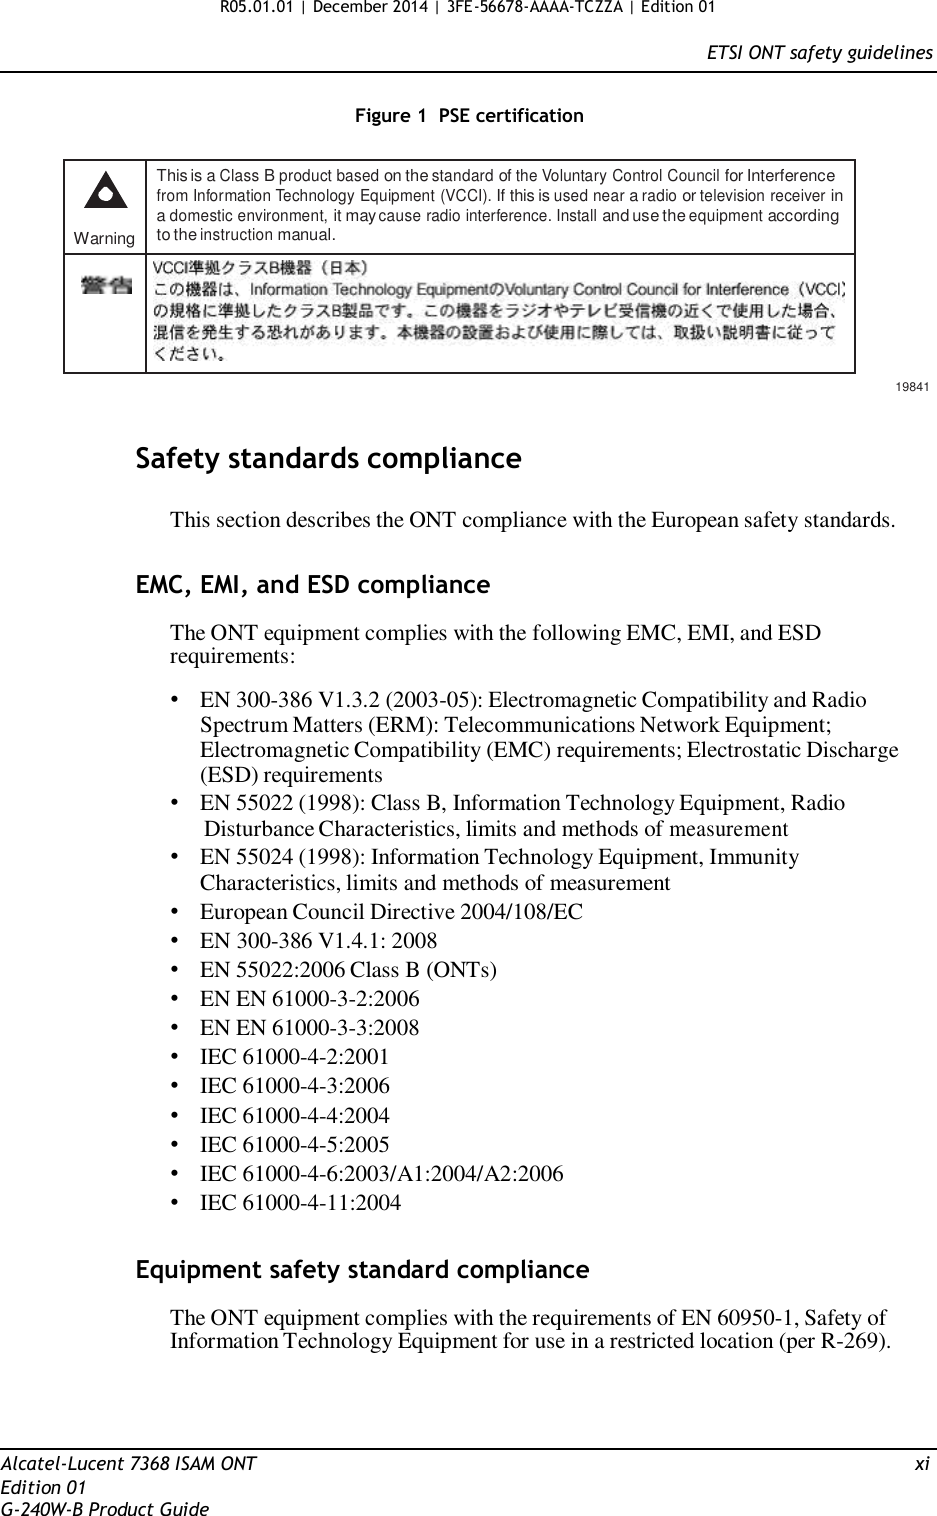 R05.01.01 | December 2014 | 3FE-56678-AAAA-TCZZA | Edition 01  ETSI ONT safety guidelines   Figure 1  PSE certification      Warning This is a Class B product based on the standard of the Voluntary Control Council for Interference from Information Technology Equipment (VCCI). If this is used near a radio or television receiver in a domestic environment, it may cause radio interference. Install and use the equipment according to the instruction manual.         19841   Safety standards compliance  This section describes the ONT compliance with the European safety standards.   EMC, EMI, and ESD compliance  The ONT equipment complies with the following EMC, EMI, and ESD requirements:  • EN 300-386 V1.3.2 (2003-05): Electromagnetic Compatibility and Radio Spectrum Matters (ERM): Telecommunications Network Equipment; Electromagnetic Compatibility (EMC) requirements; Electrostatic Discharge (ESD) requirements • EN 55022 (1998): Class B, Information Technology Equipment, Radio Disturbance Characteristics, limits and methods of measurement • EN 55024 (1998): Information Technology Equipment, Immunity Characteristics, limits and methods of measurement • European Council Directive 2004/108/EC • EN 300-386 V1.4.1: 2008 • EN 55022:2006 Class B (ONTs) • EN EN 61000-3-2:2006 • EN EN 61000-3-3:2008 • IEC 61000-4-2:2001 • IEC 61000-4-3:2006 • IEC 61000-4-4:2004 • IEC 61000-4-5:2005 • IEC 61000-4-6:2003/A1:2004/A2:2006 • IEC 61000-4-11:2004   Equipment safety standard compliance  The ONT equipment complies with the requirements of EN 60950-1, Safety of Information Technology Equipment for use in a restricted location (per R-269).      Alcatel-Lucent 7368 ISAM ONT  xi Edition 01 G-240W-B Product Guide 